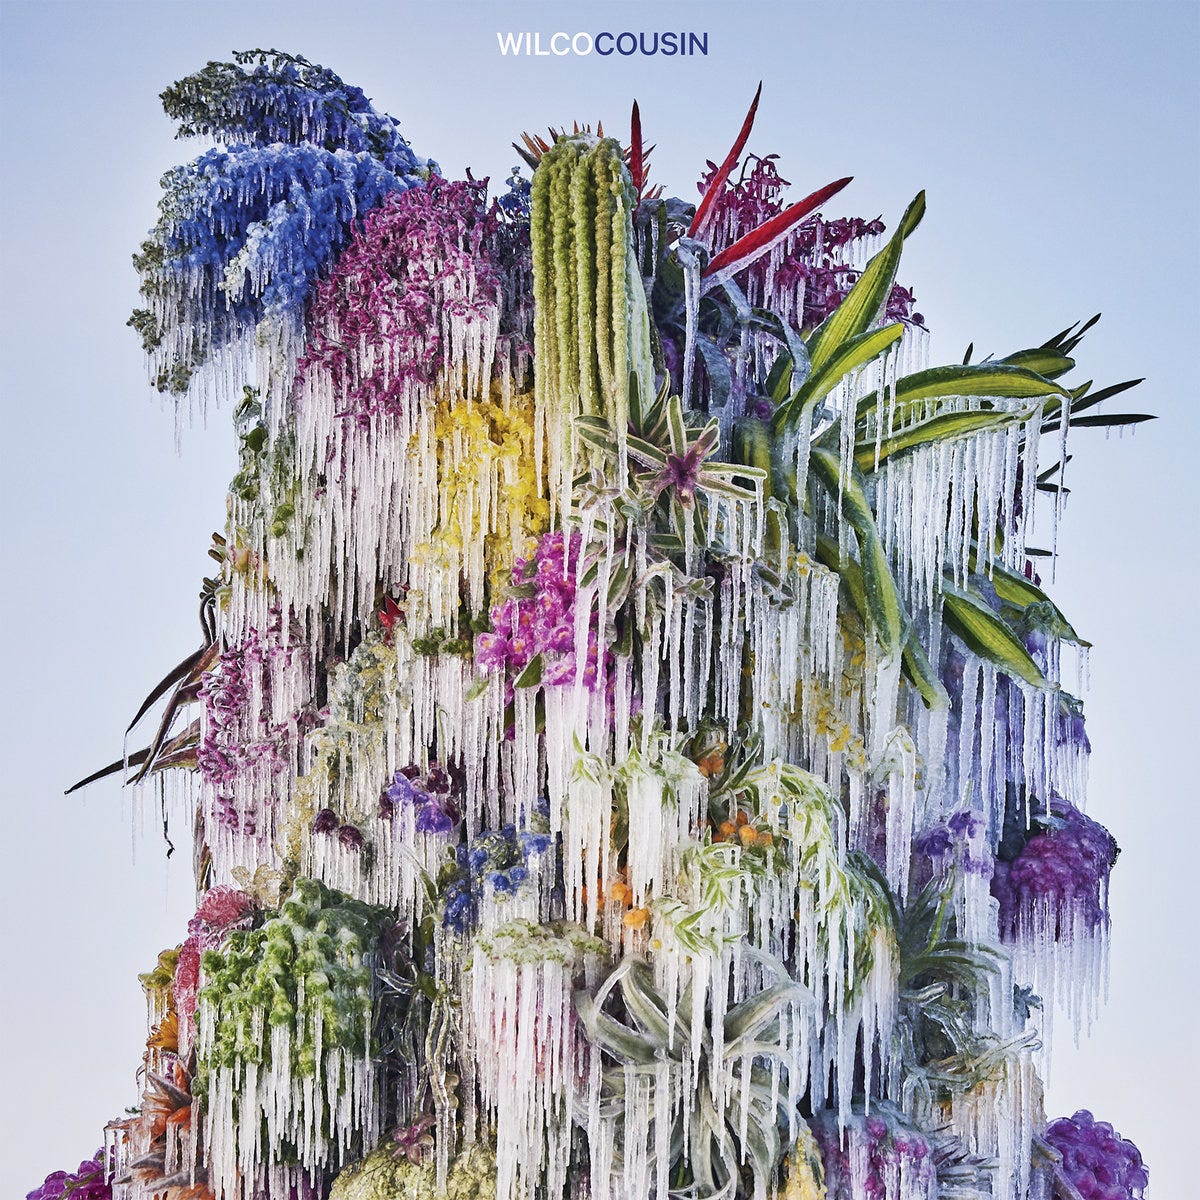 The album art for Wilco’s album Cousin. Multicolored flowers are frozen in front of a blue gradient background.